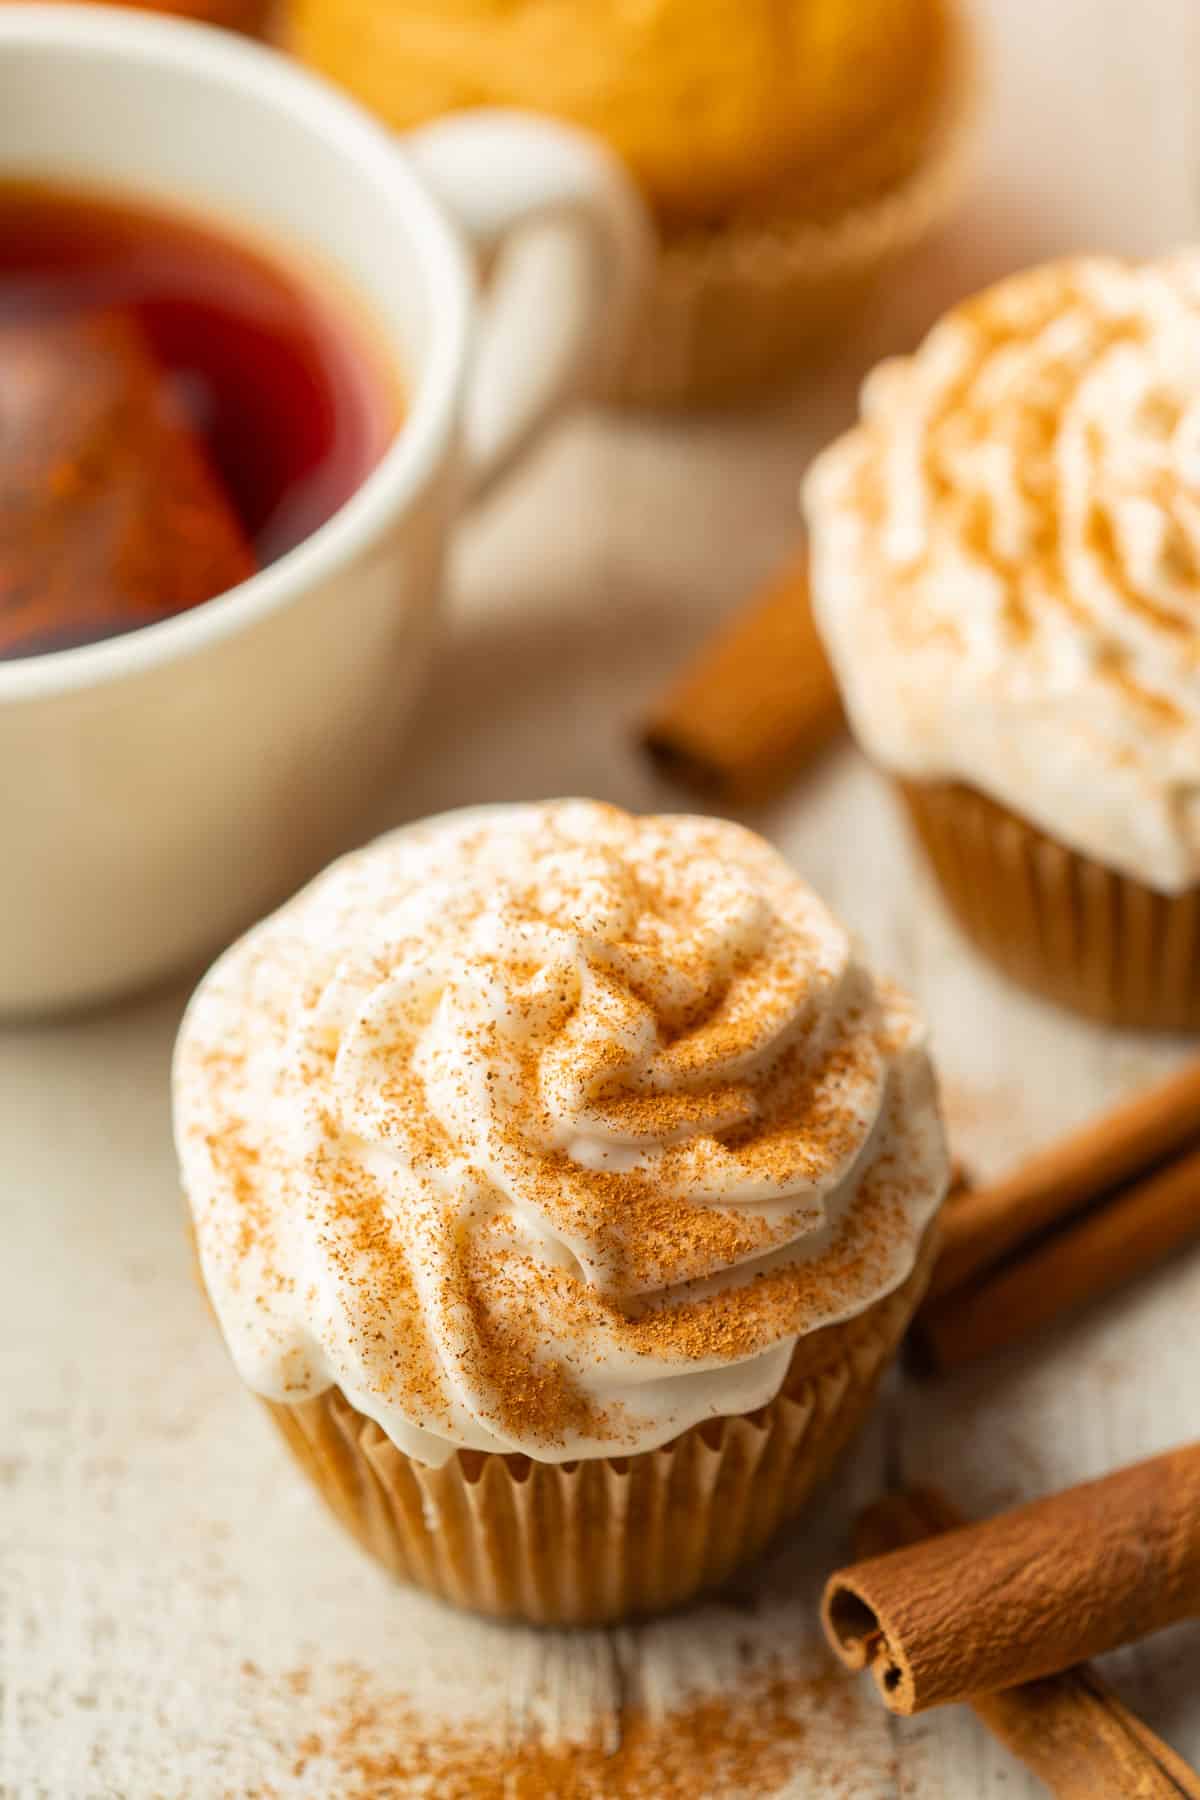 Vegan Pumpkin Cupcakes on a white wooden surface with cinnamon sticks and a cup of tea.